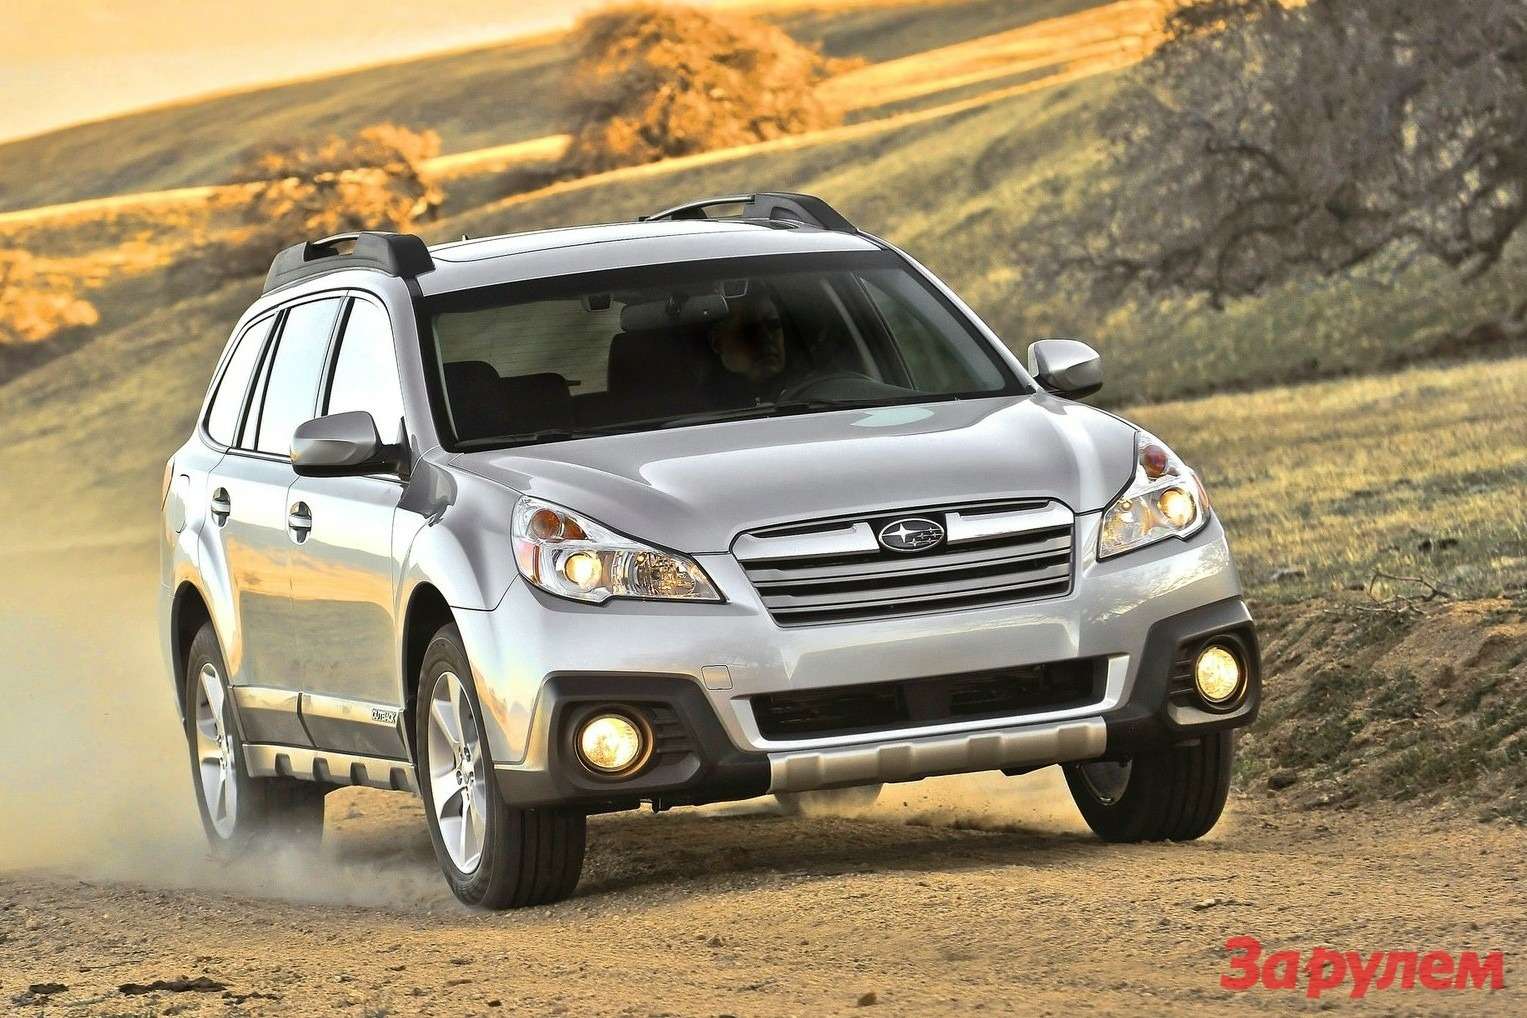 Subaru Outback side-front view